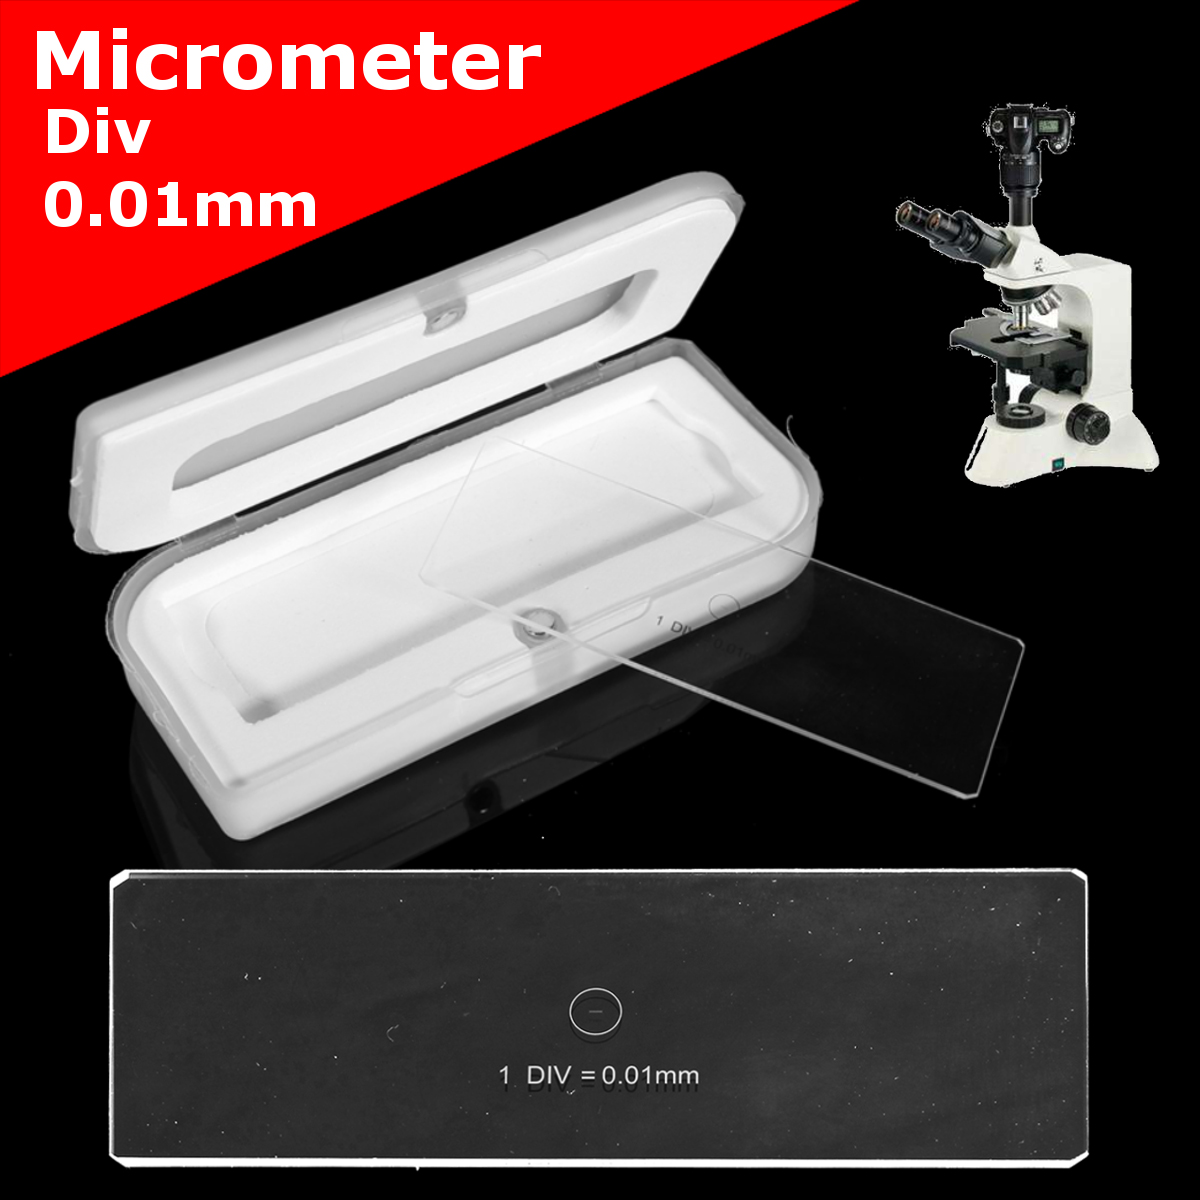 DIV-001mm-Micrometer-Calibration-Slide-Microscope-Objective-Stage-Ruler-Scales-1245651-1